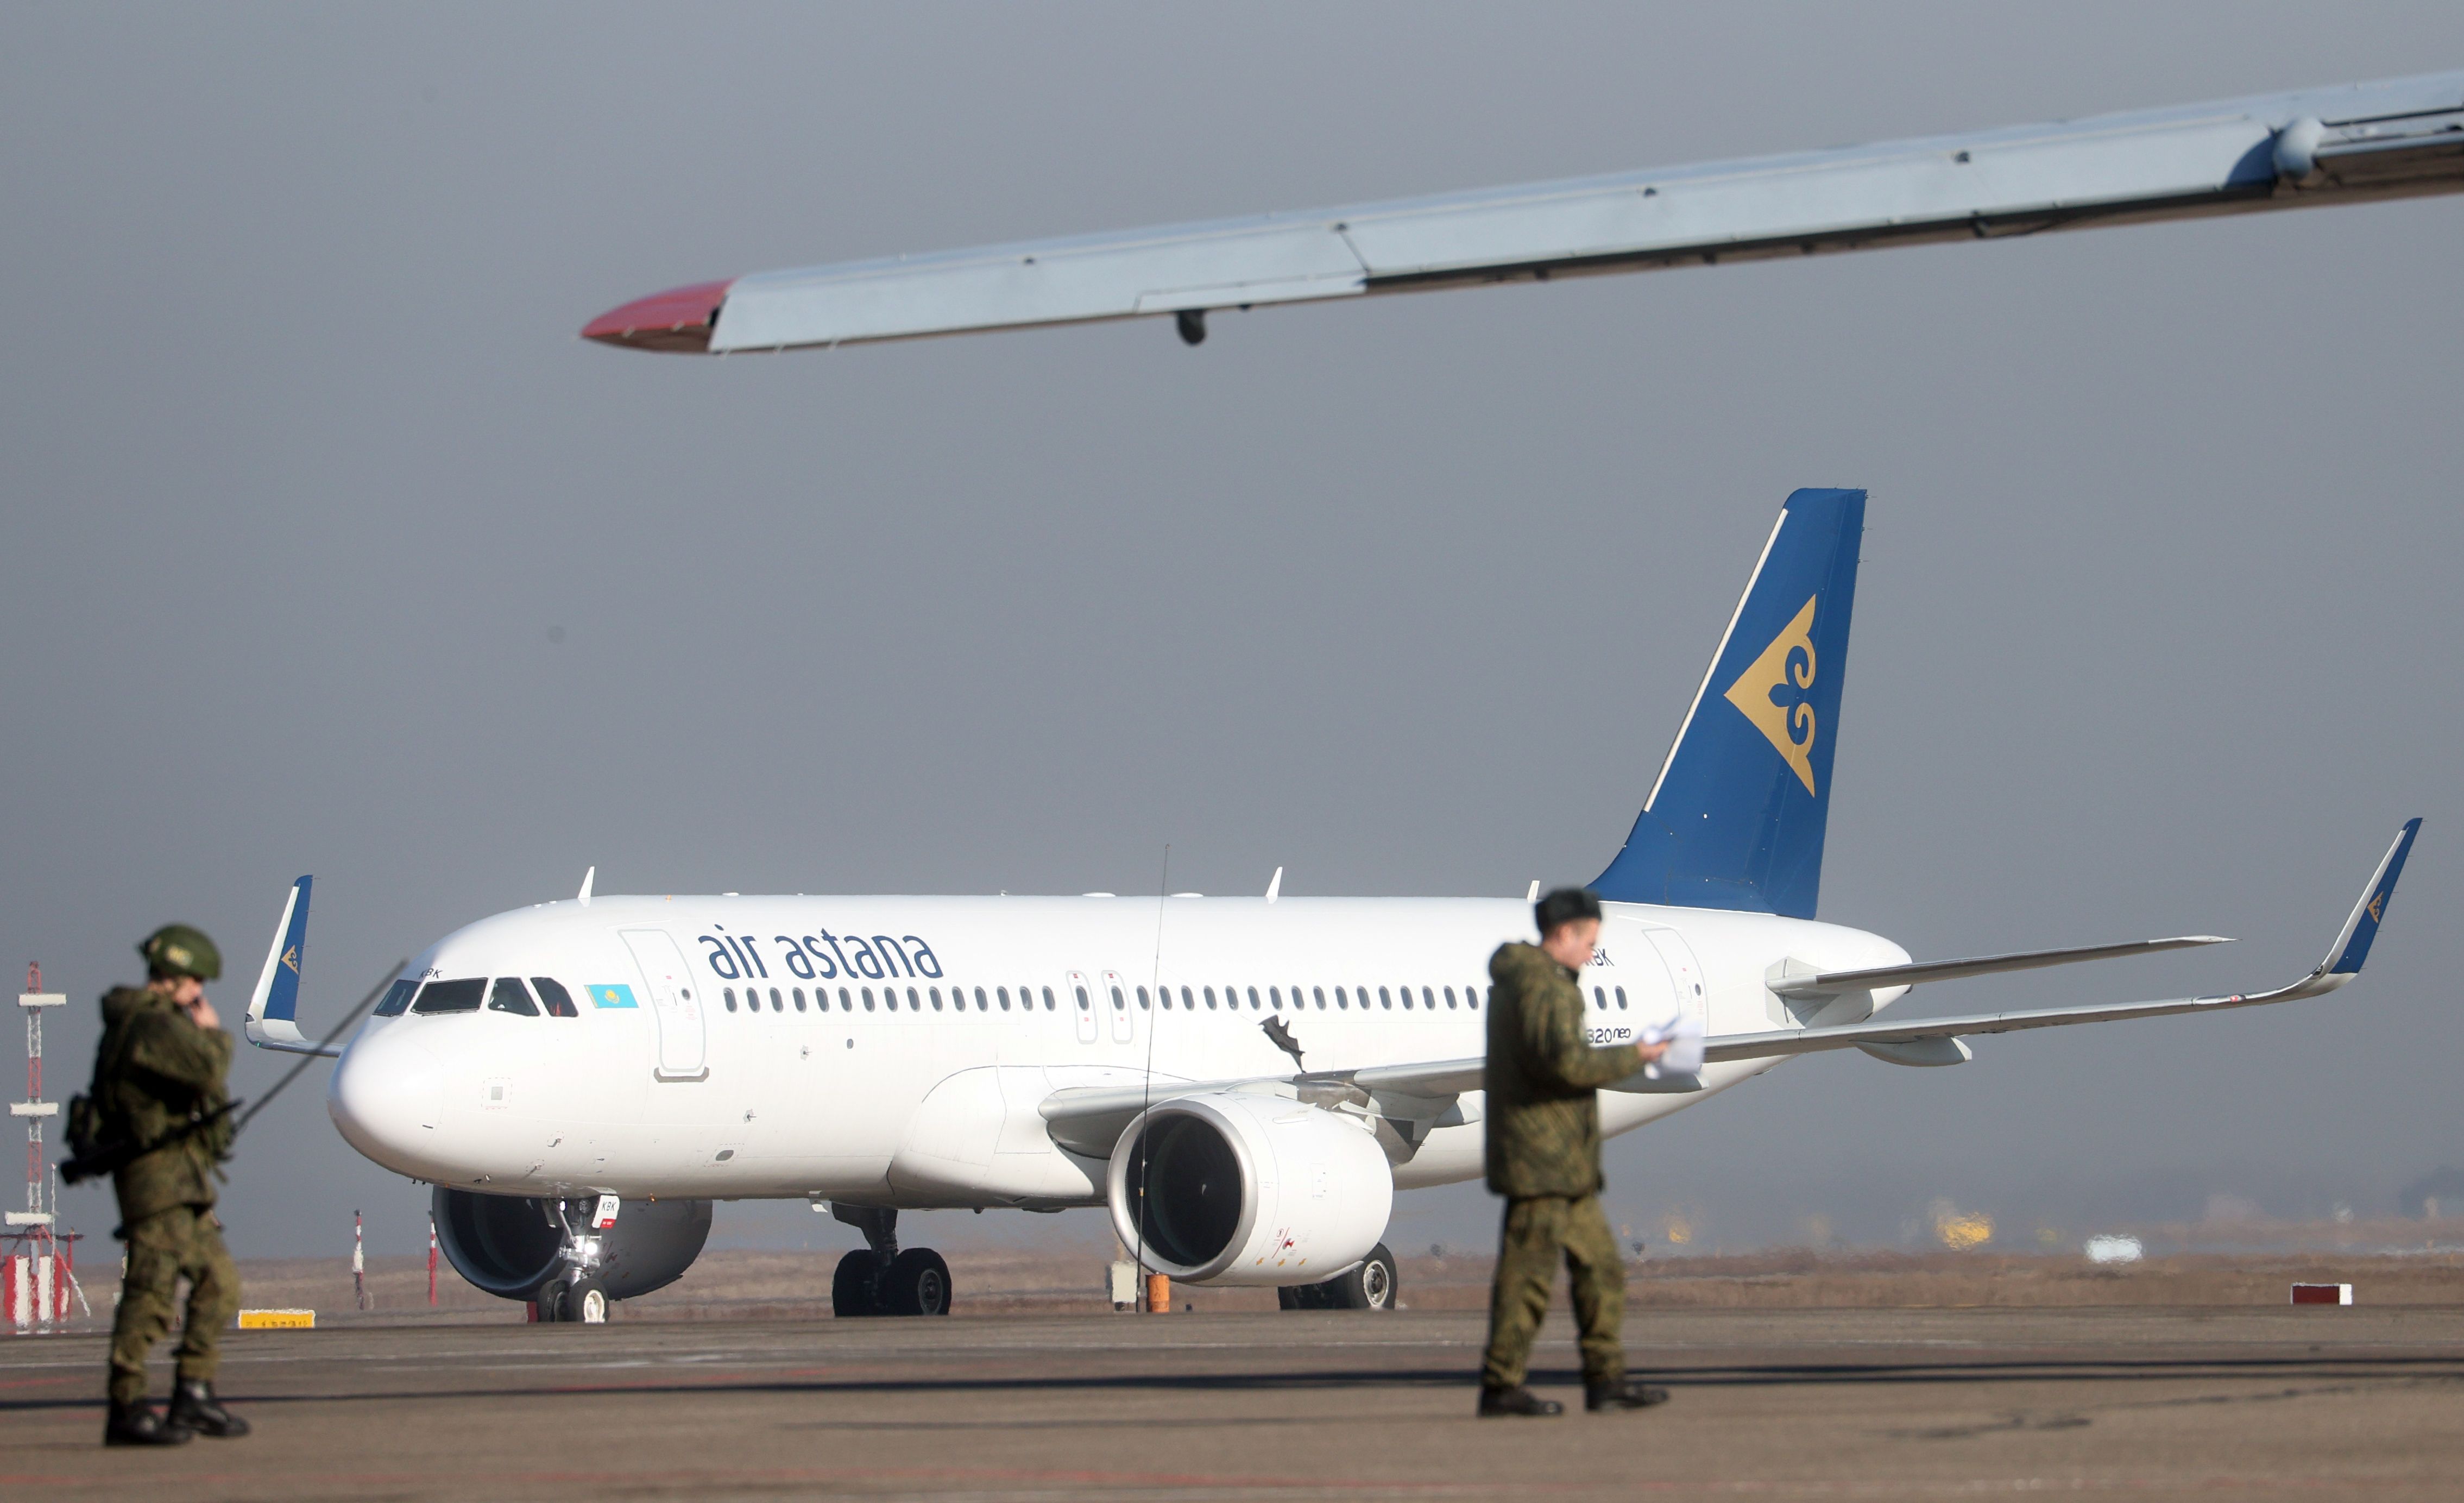 Air Astana was impacted by unrest in Khazakstan at the start of the year. Photo: Getty Images